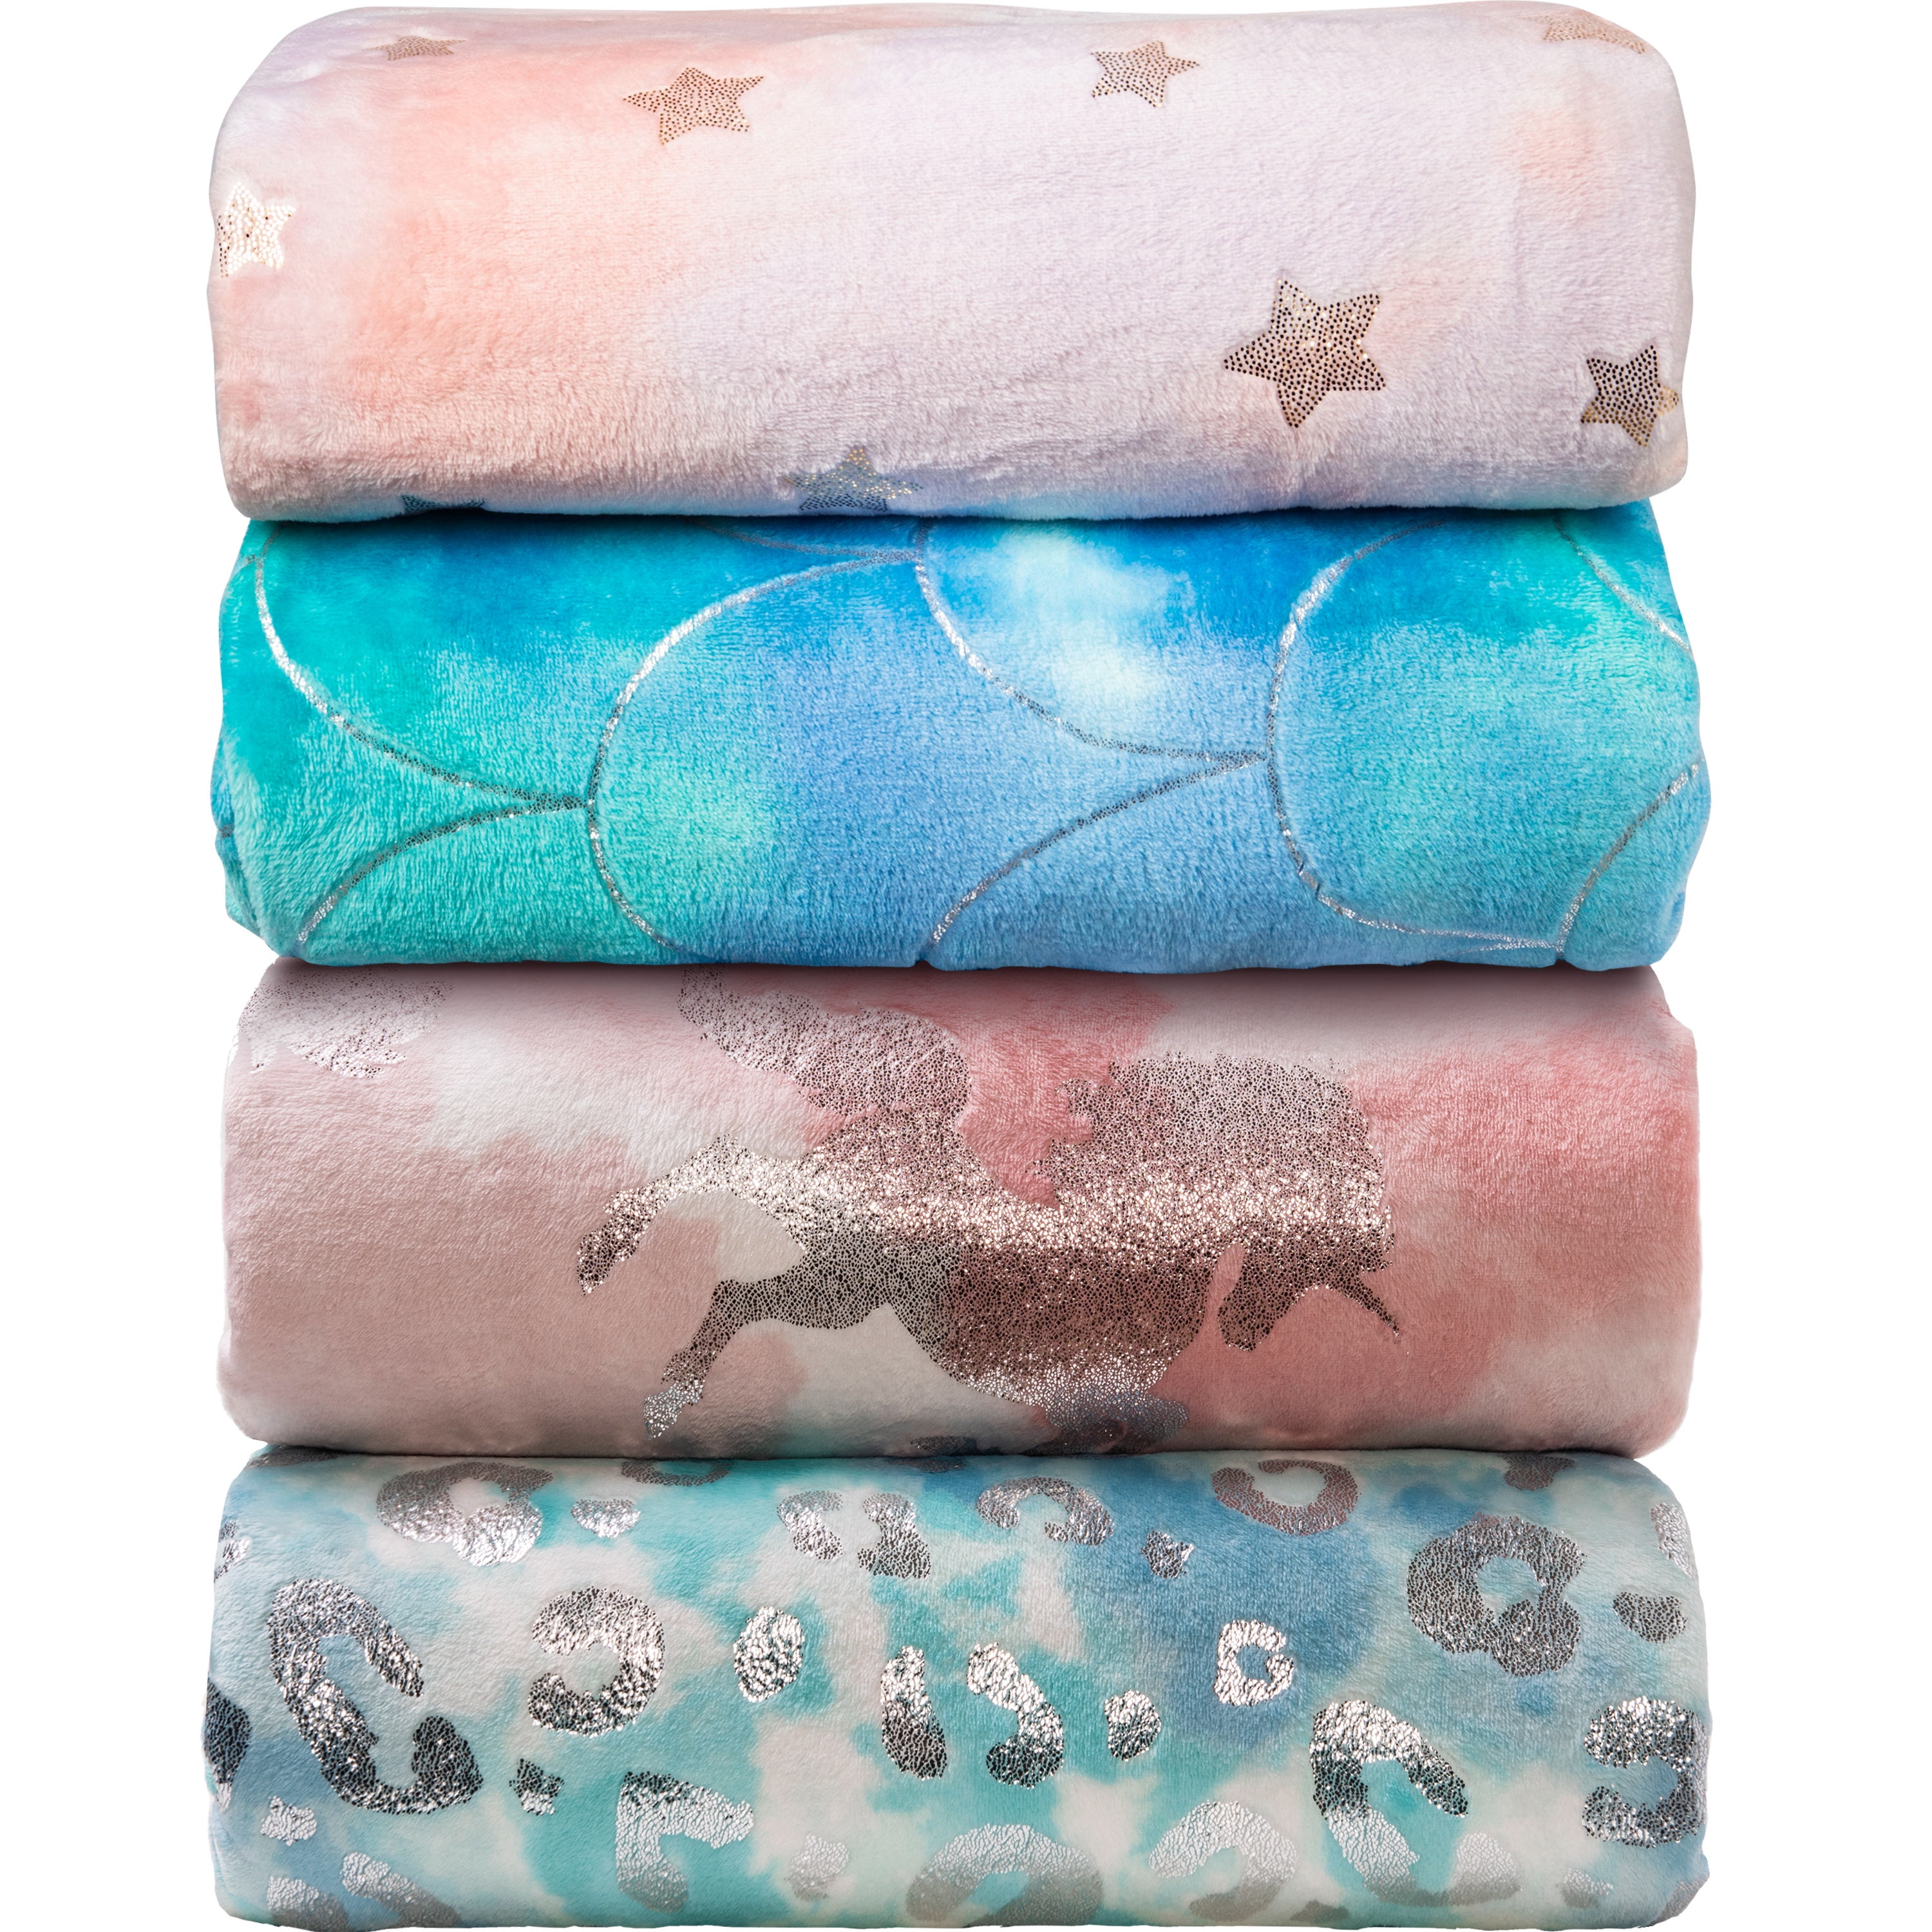 MSGUIDE Colorful Mermaid Scales Flannel Throw Blankets Super Soft Warm Plush Fluffy Lightweight Cozy Fuzzy Fleece Blankets for Children Teens Young Girls or Adult for Couch Bed Sofa 50x40